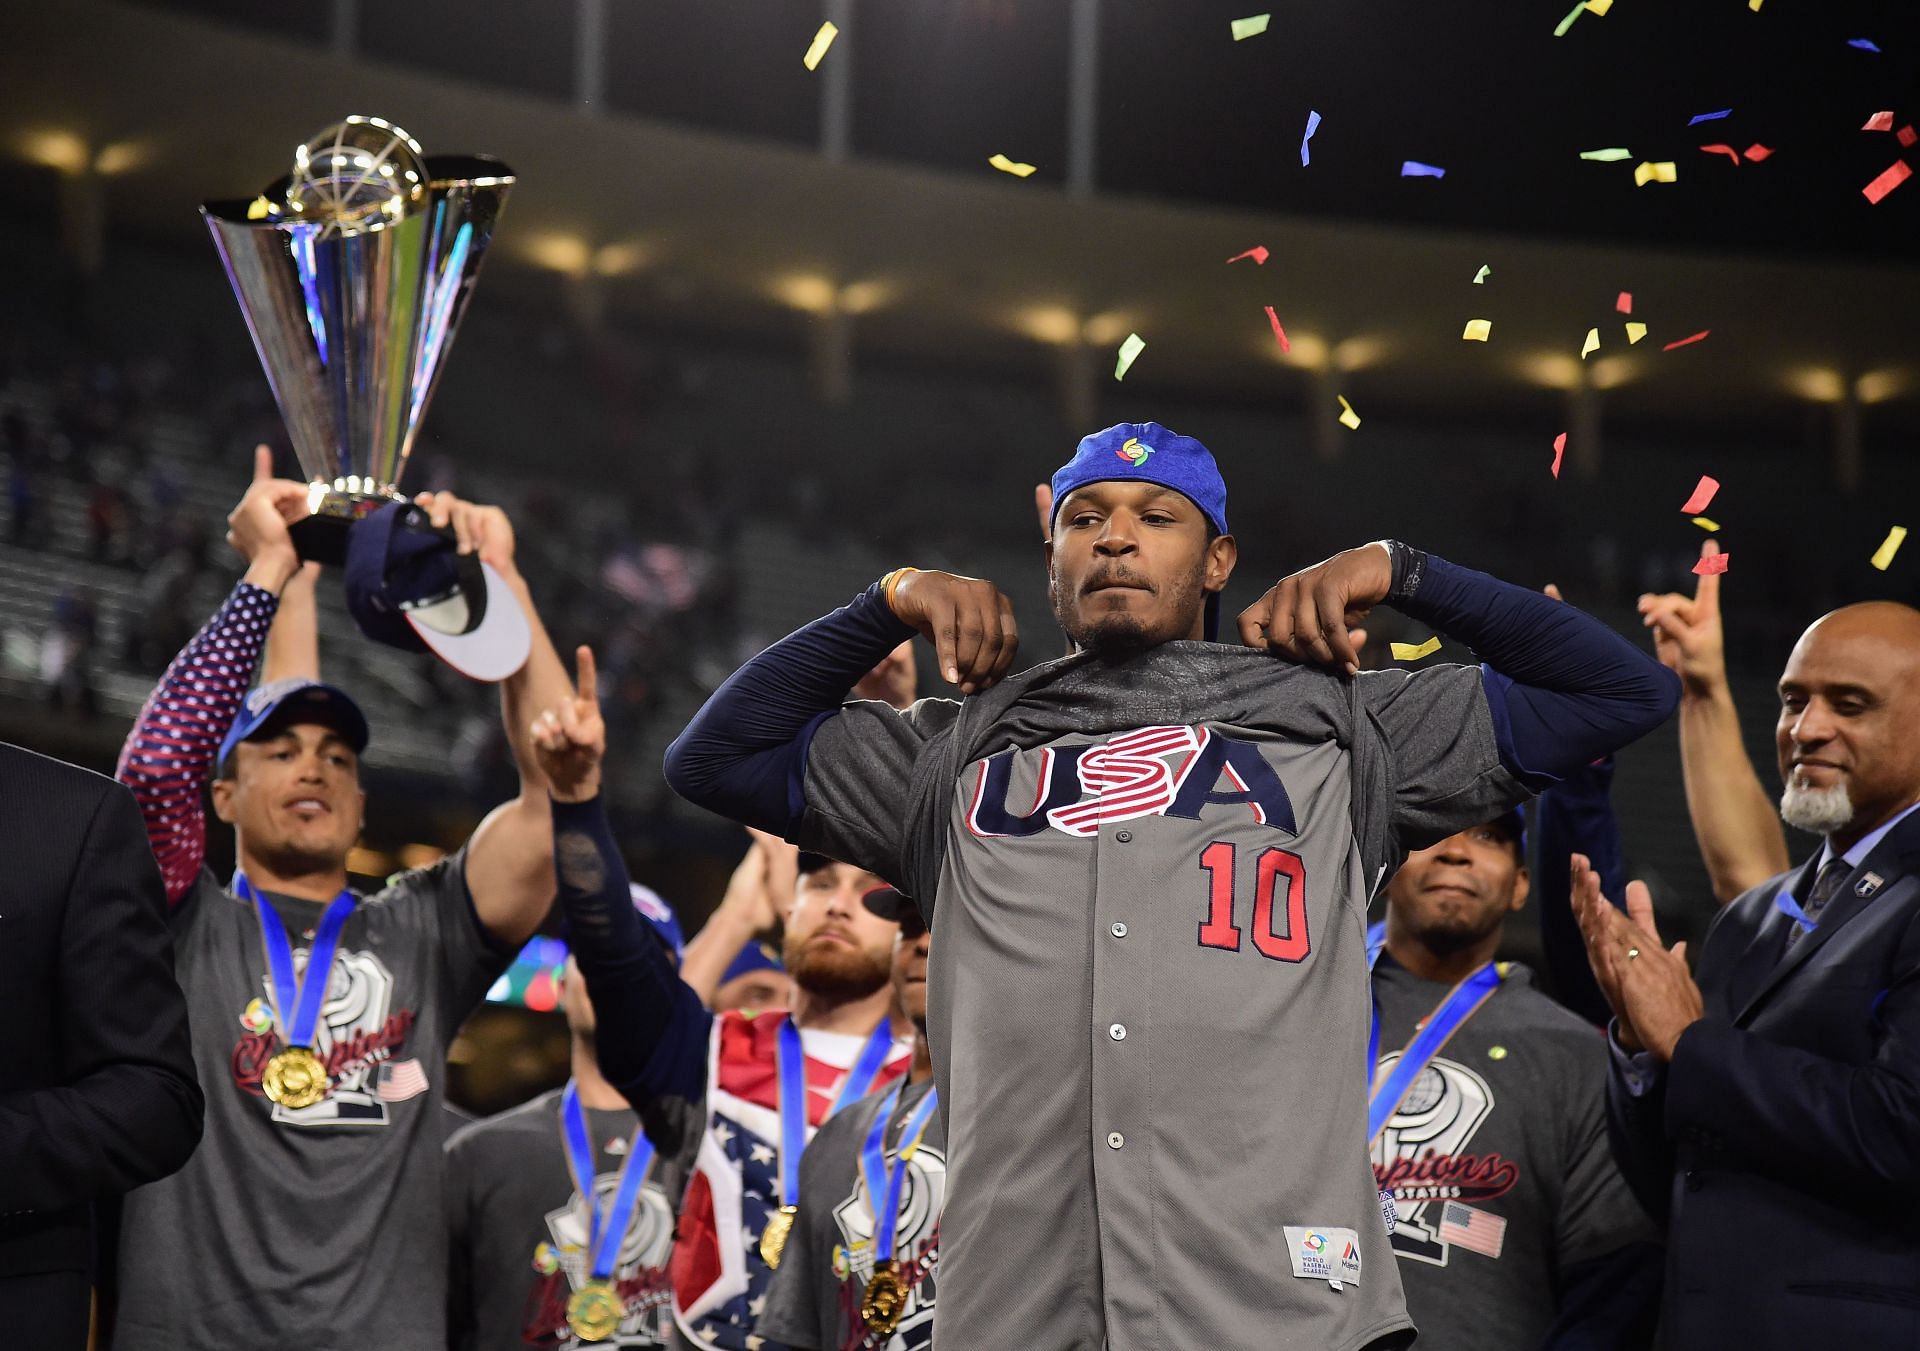 Adam Jones #10 of team United States shoes his USA shirt while teammate Giancarlo Stanton #27 holds the trophy after their 8-0 win over team Puerto Rico during Game 3 of the Championship Round of the 2017 World Baseball Classic at Dodger Stadium on March 22, 2017, in Los Angeles, California.